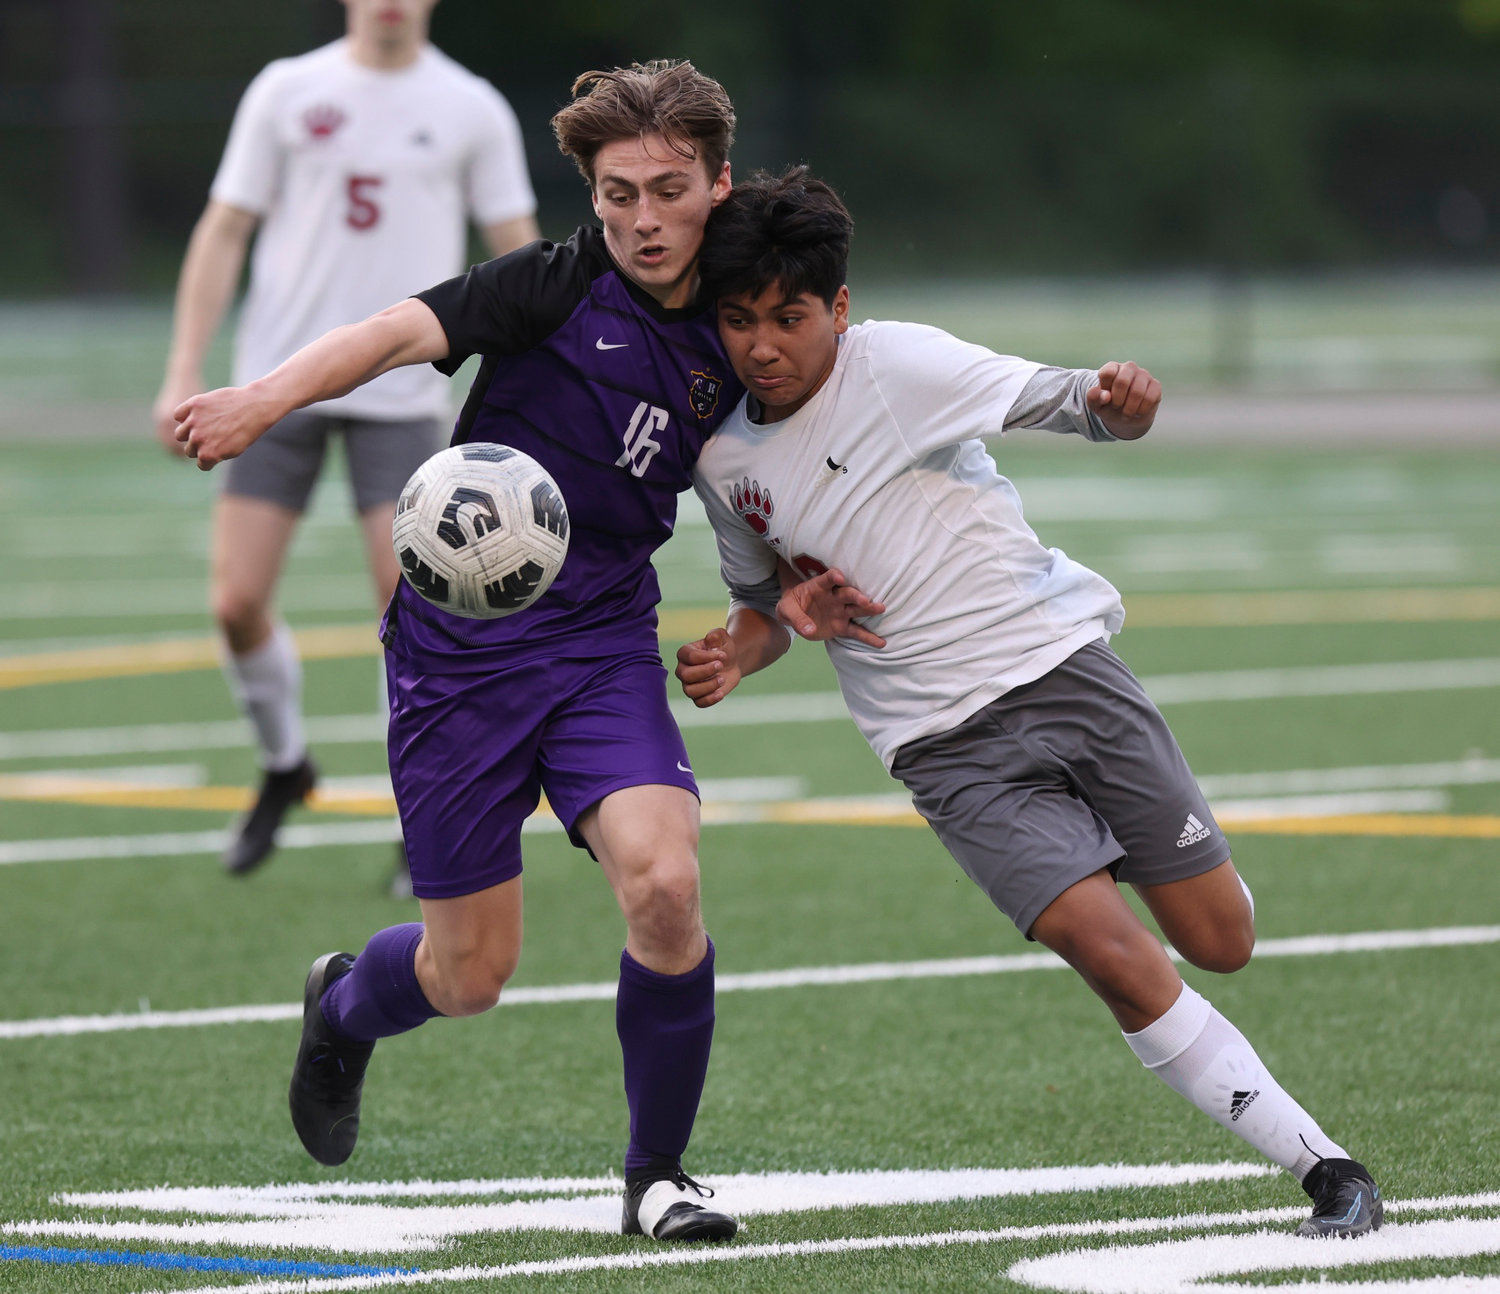 Columbia River's Elliot McClafferty, left, and W.F. West's Adrian Jaimes, right, battle for the ball in the first round of the 2A state playoffs Tuesday in Vancouver.